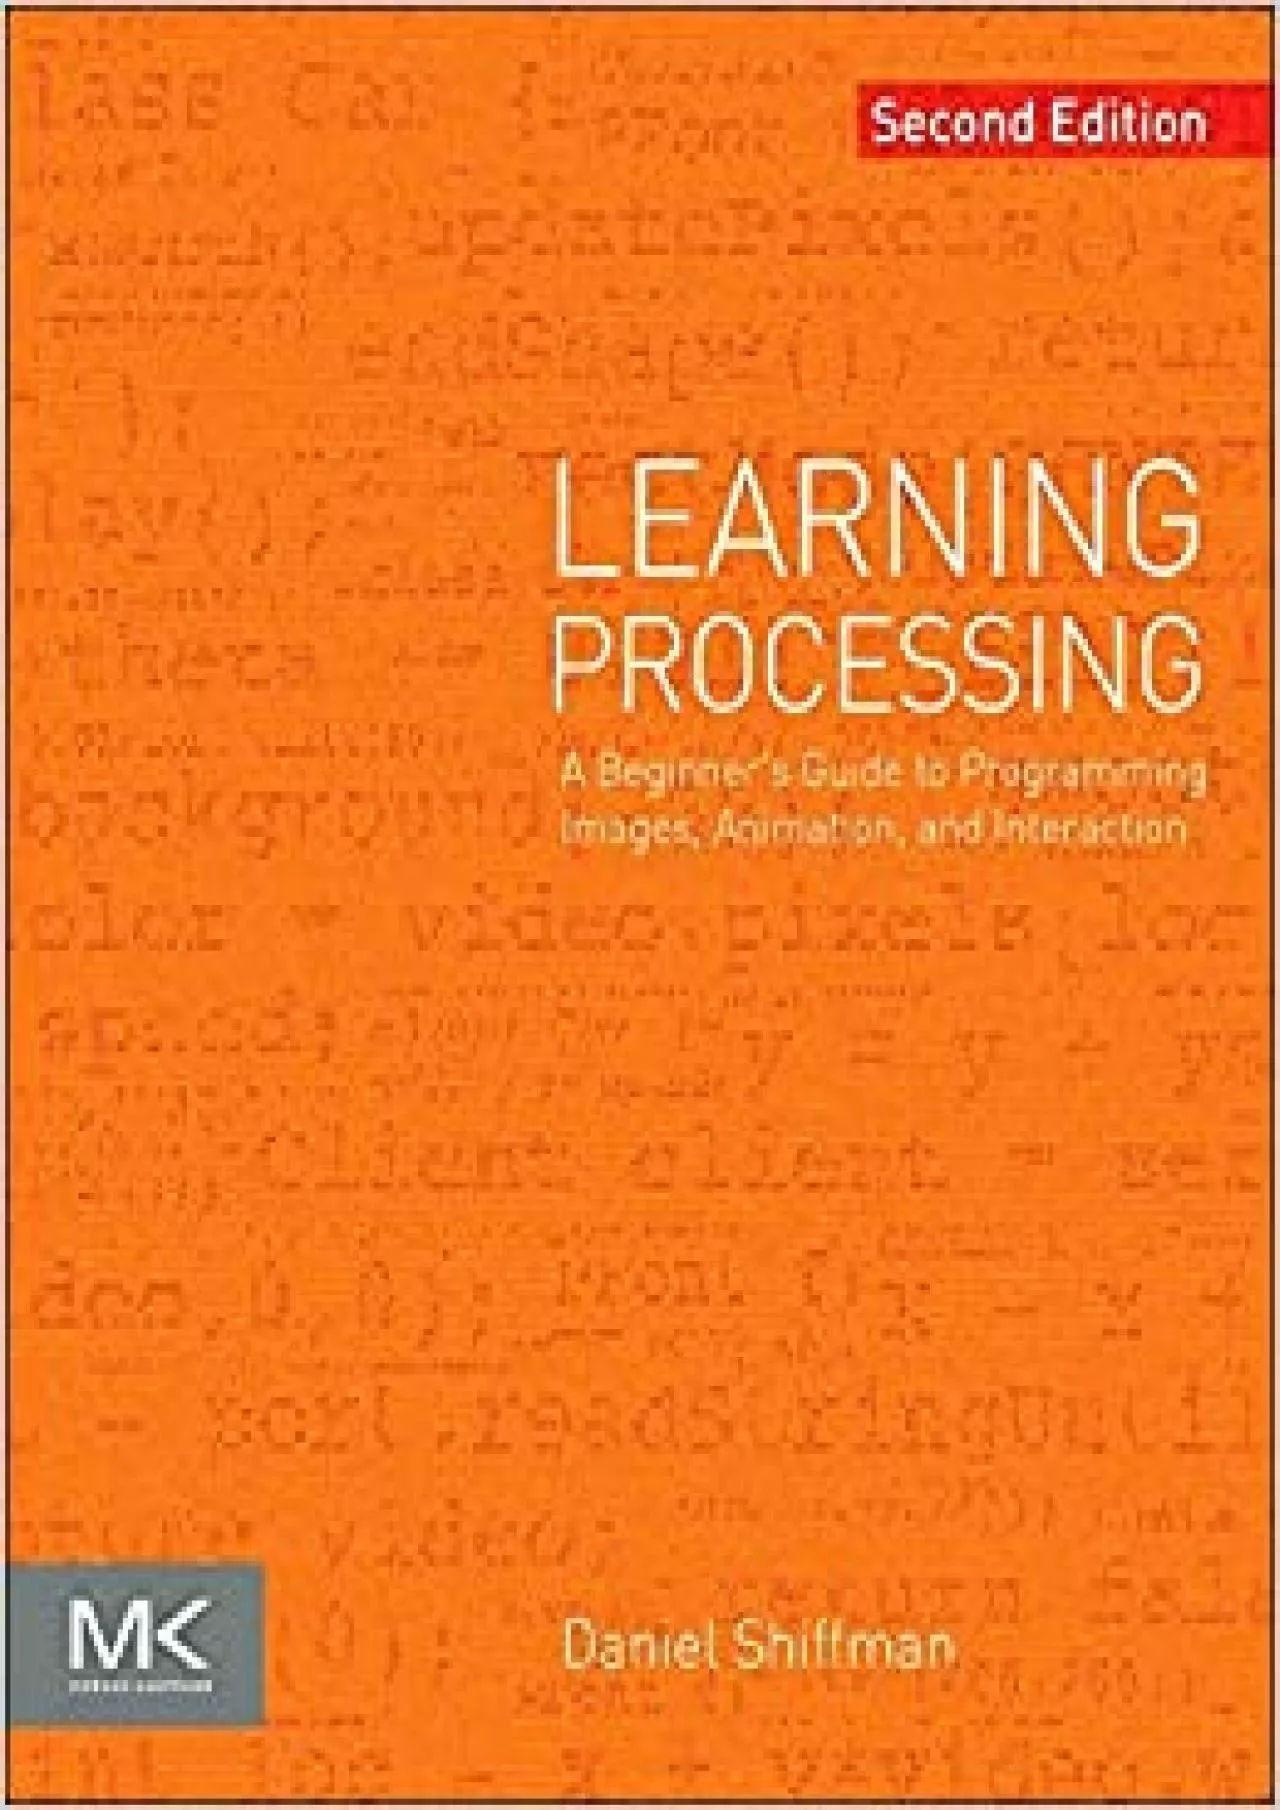 (BOOS)-Learning Processing A Beginner\'s Guide to Programming Images Animation and Interaction